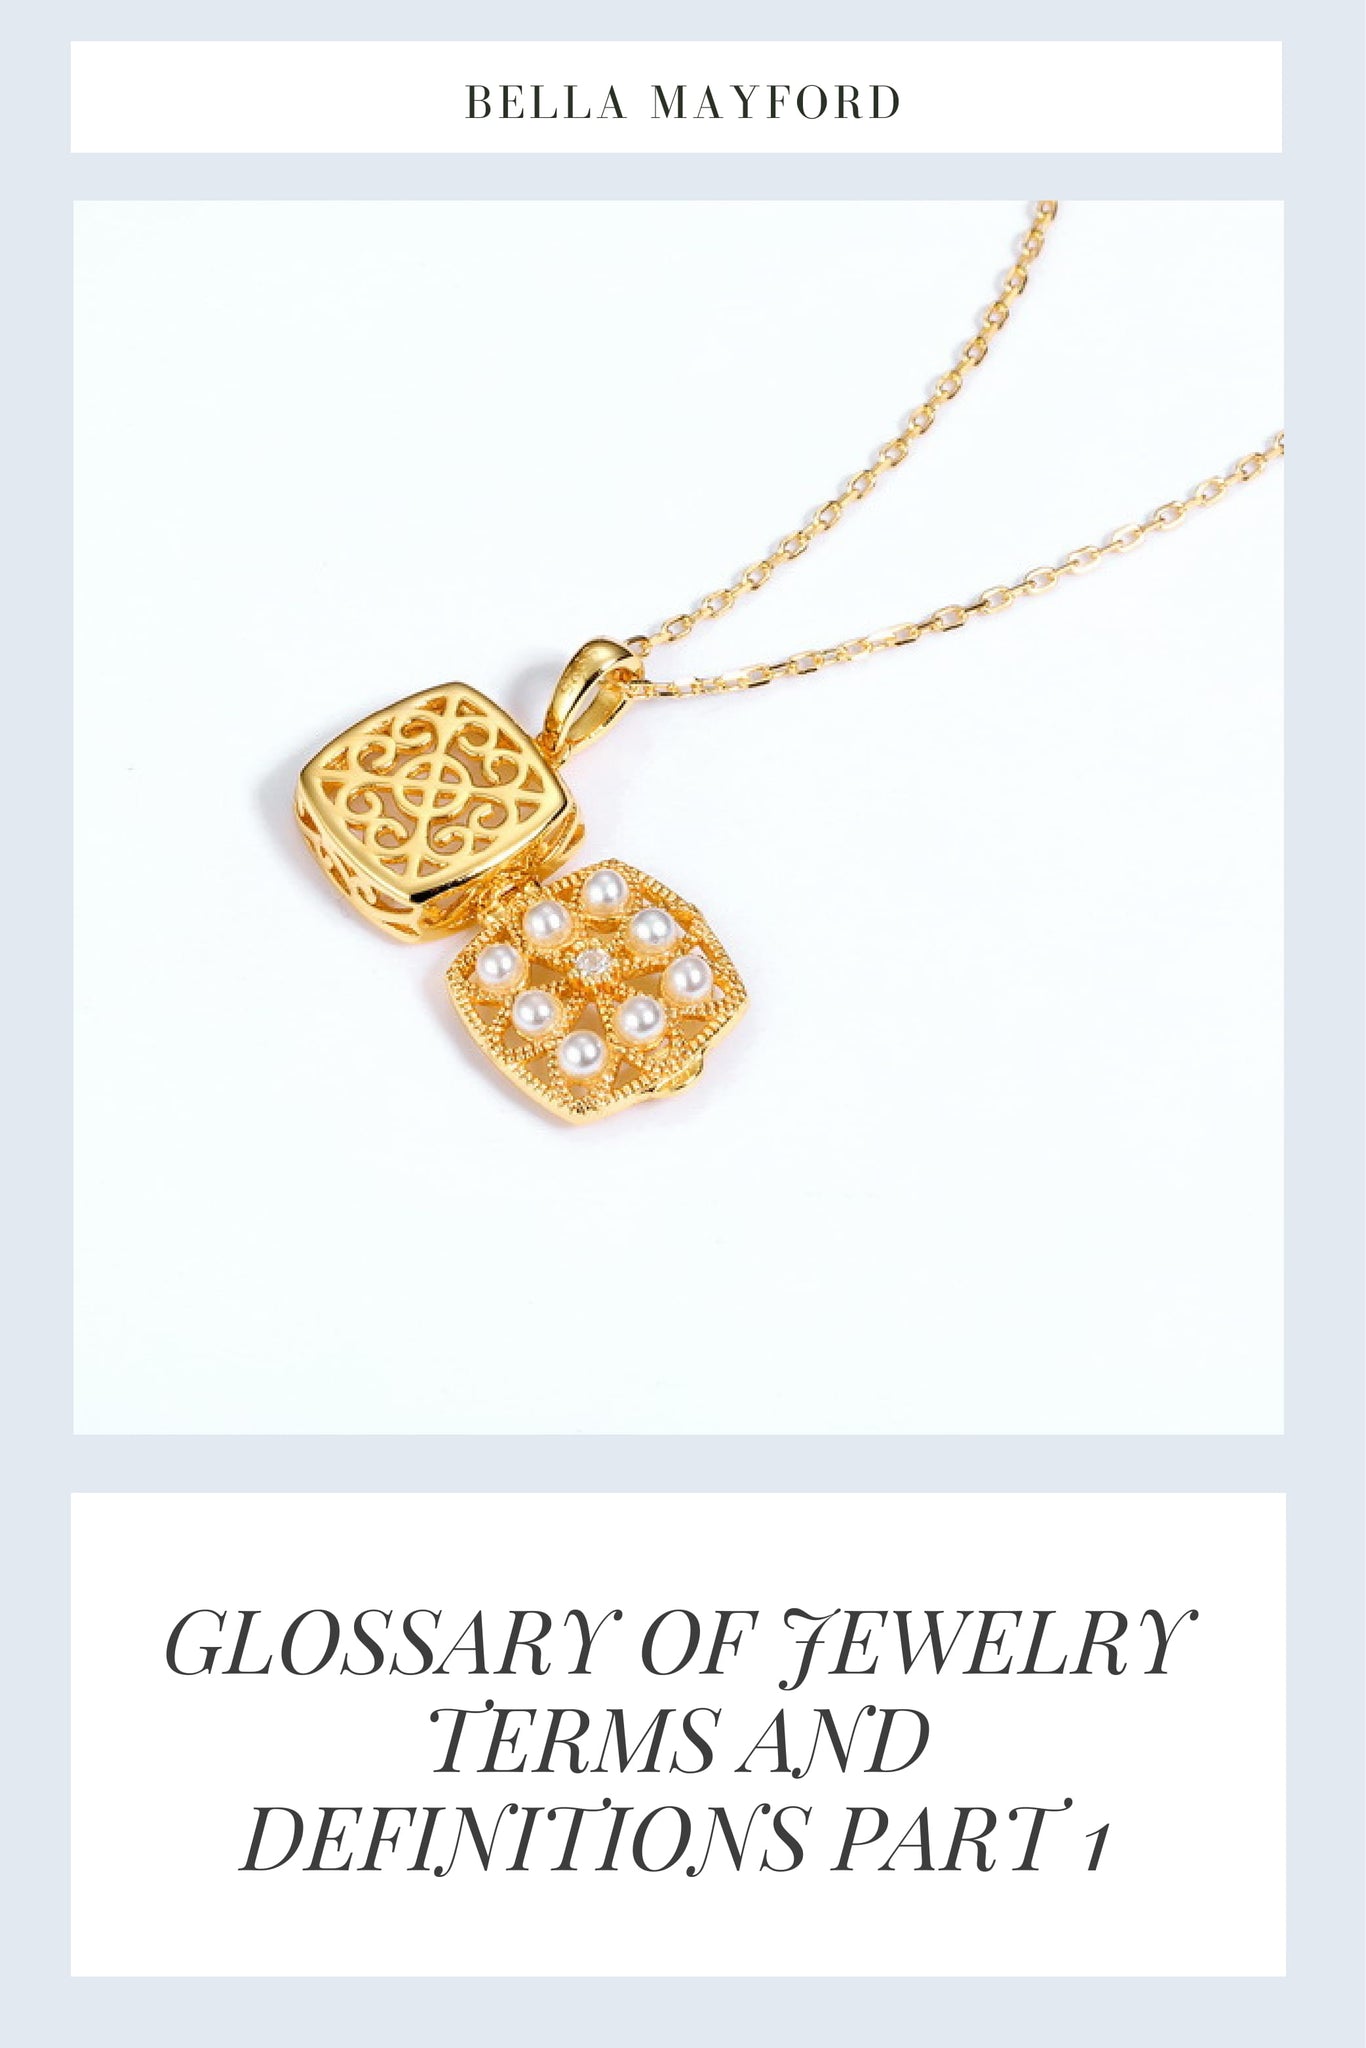 GLOSSARY OF JEWELRY TERMS AND DEFINITIONS PART 1